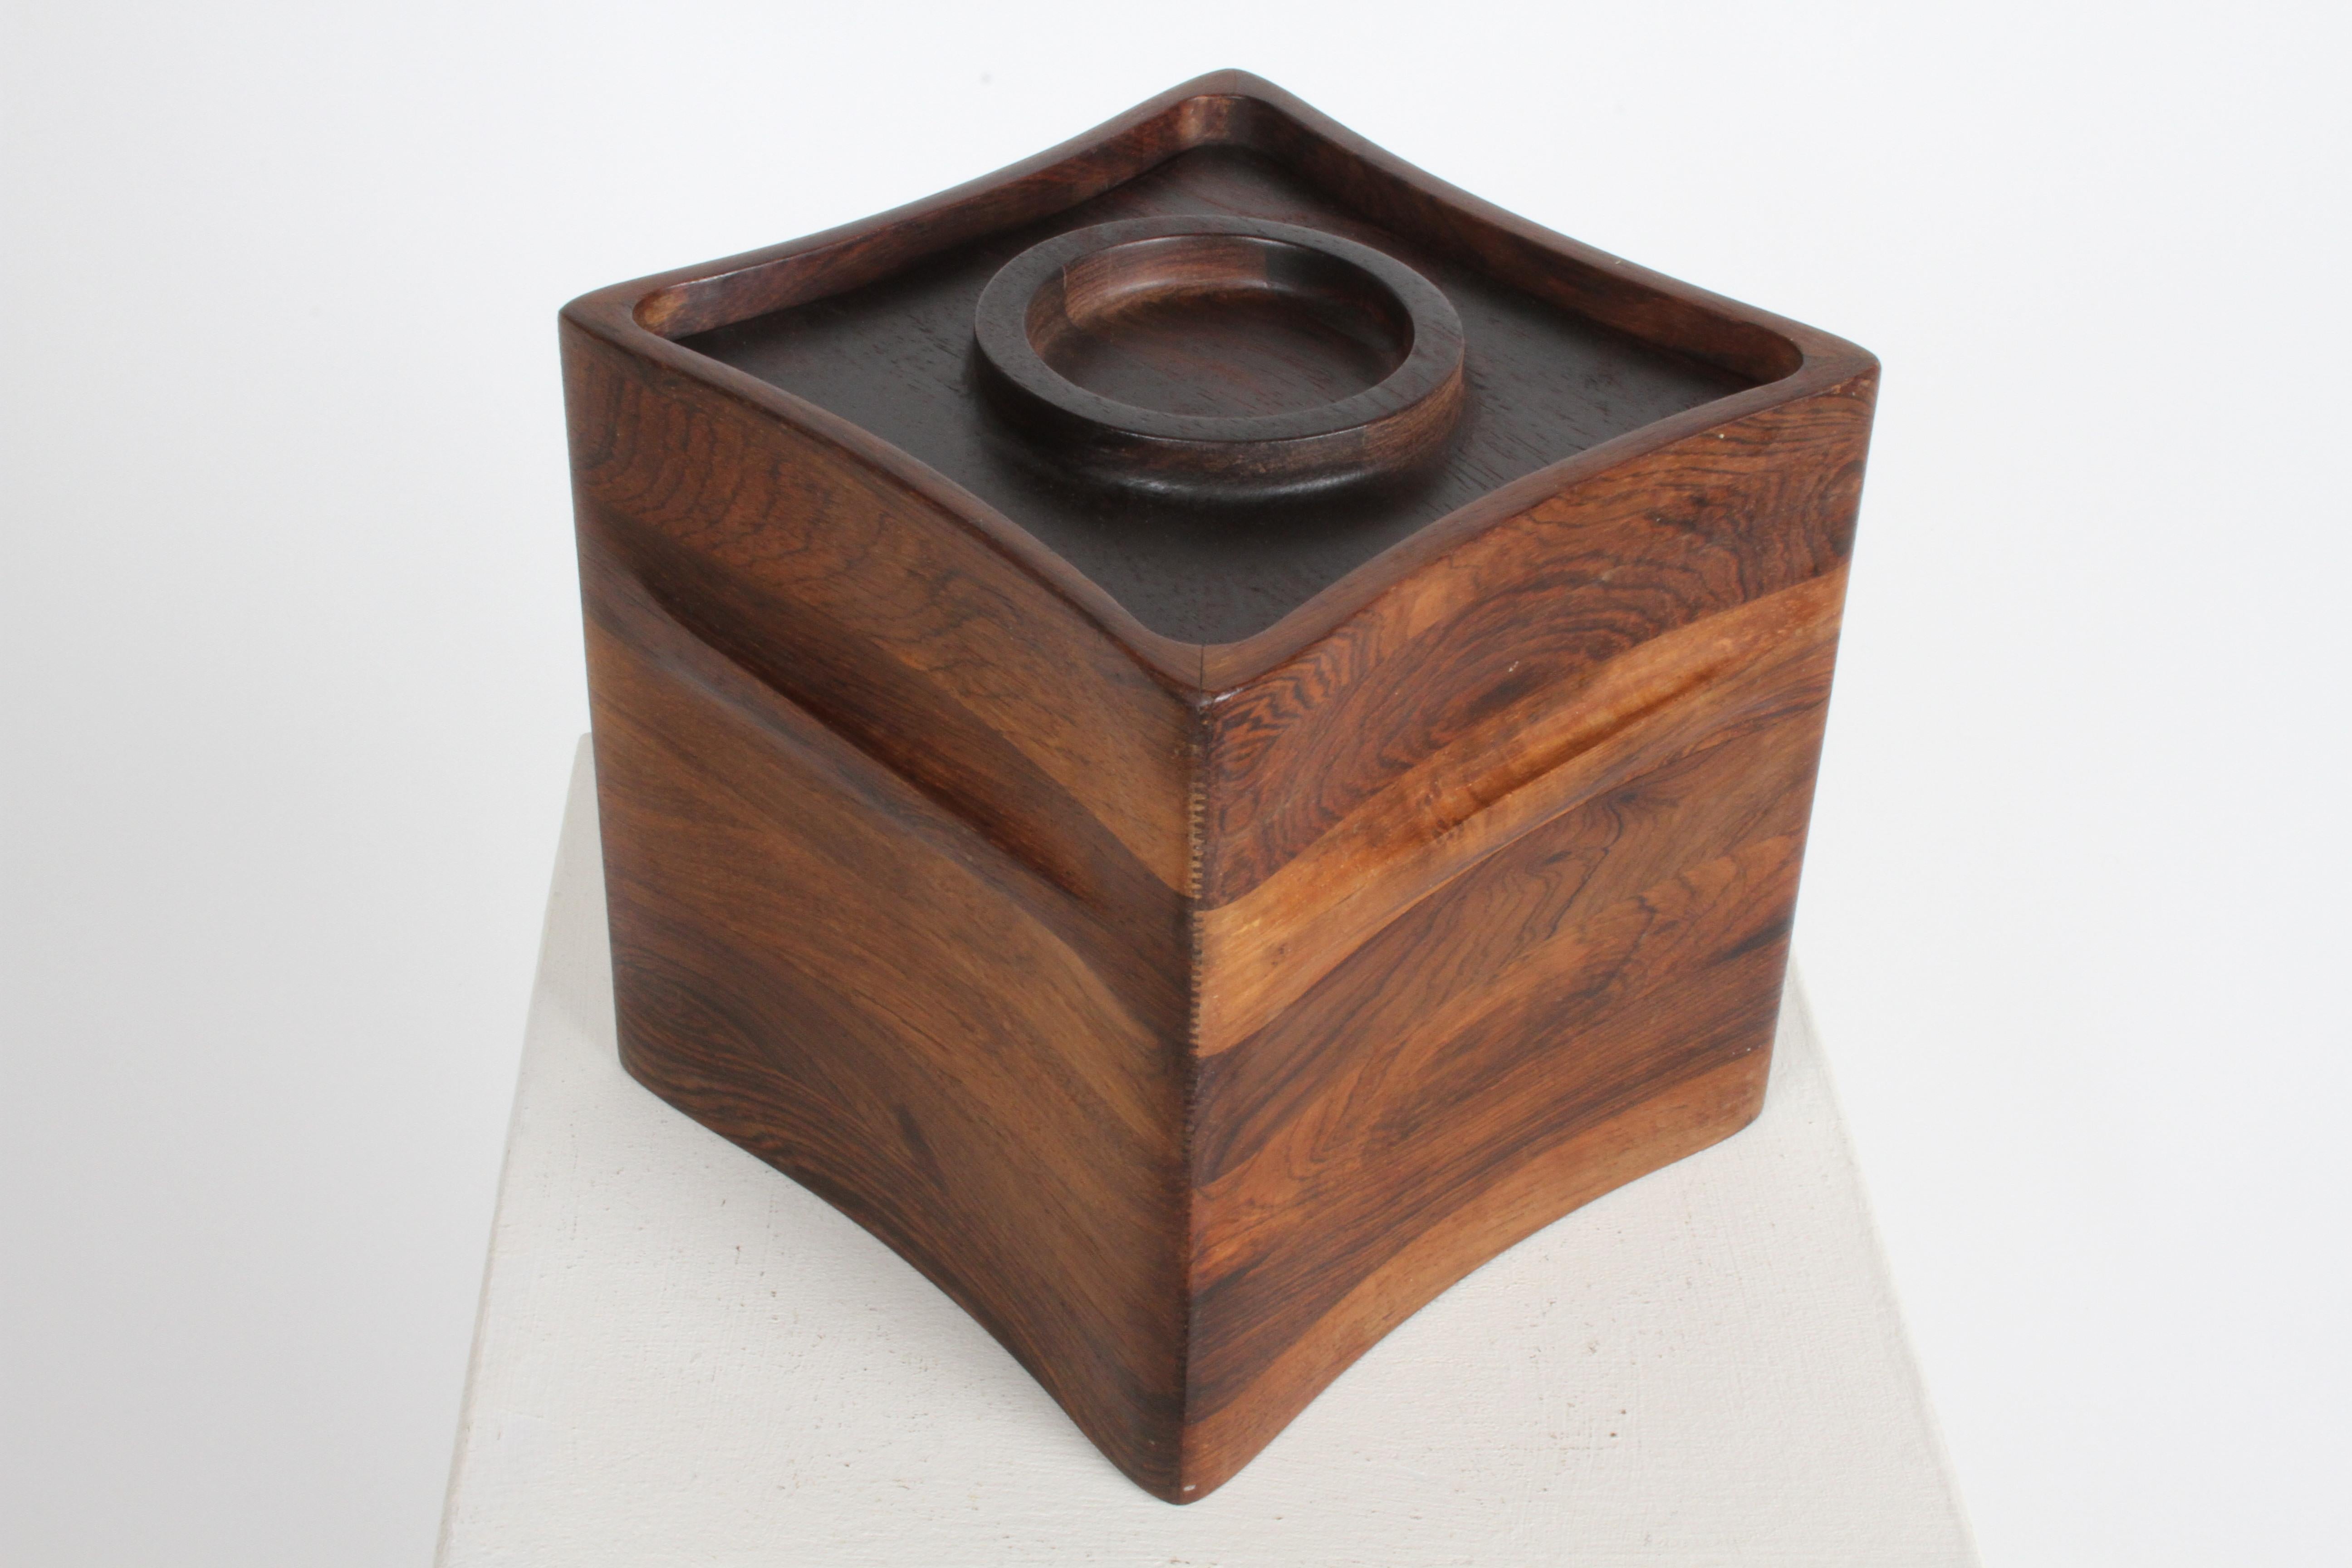 Rare Danish Modern Rosewood Ice Bucket designed by the Jens Harald Quistgaard for Dansk Designs, Denmark in the 1960's for his 'Rare Woods’ Limited Edition collection. Scandinavian Modern at its best, with sculpted sides, integrated handles on all